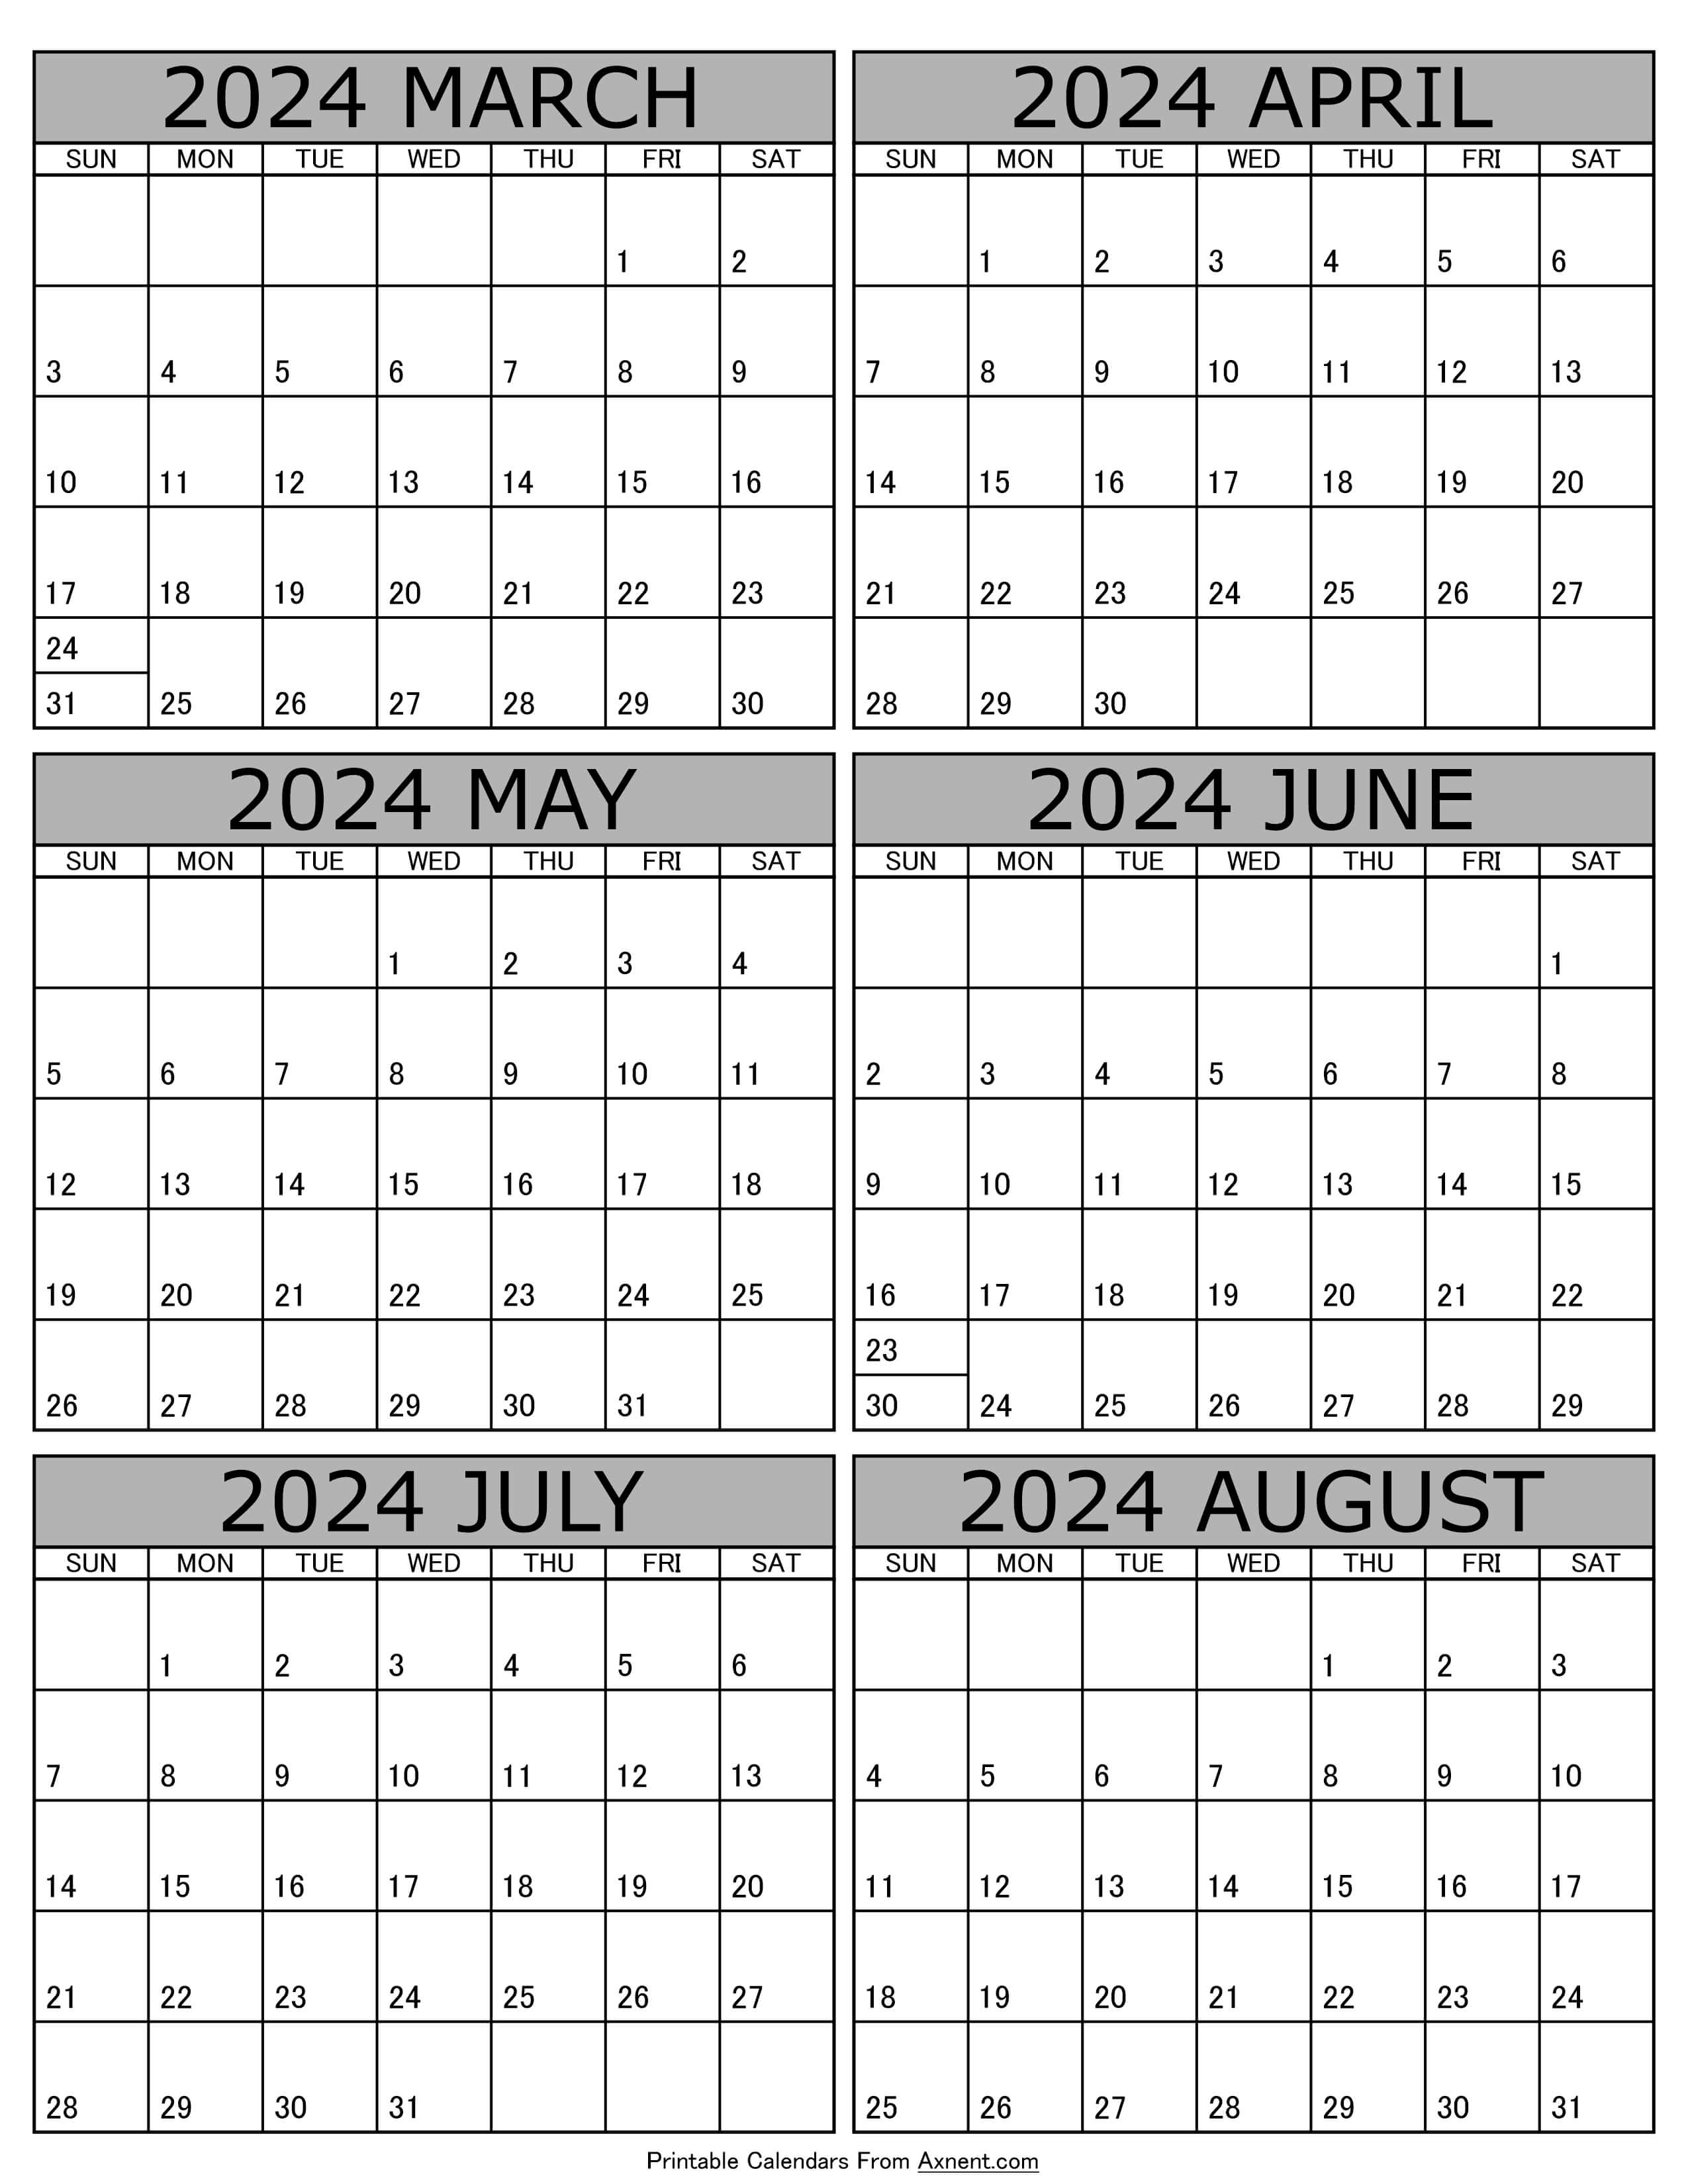 Calendar 2024 March to August